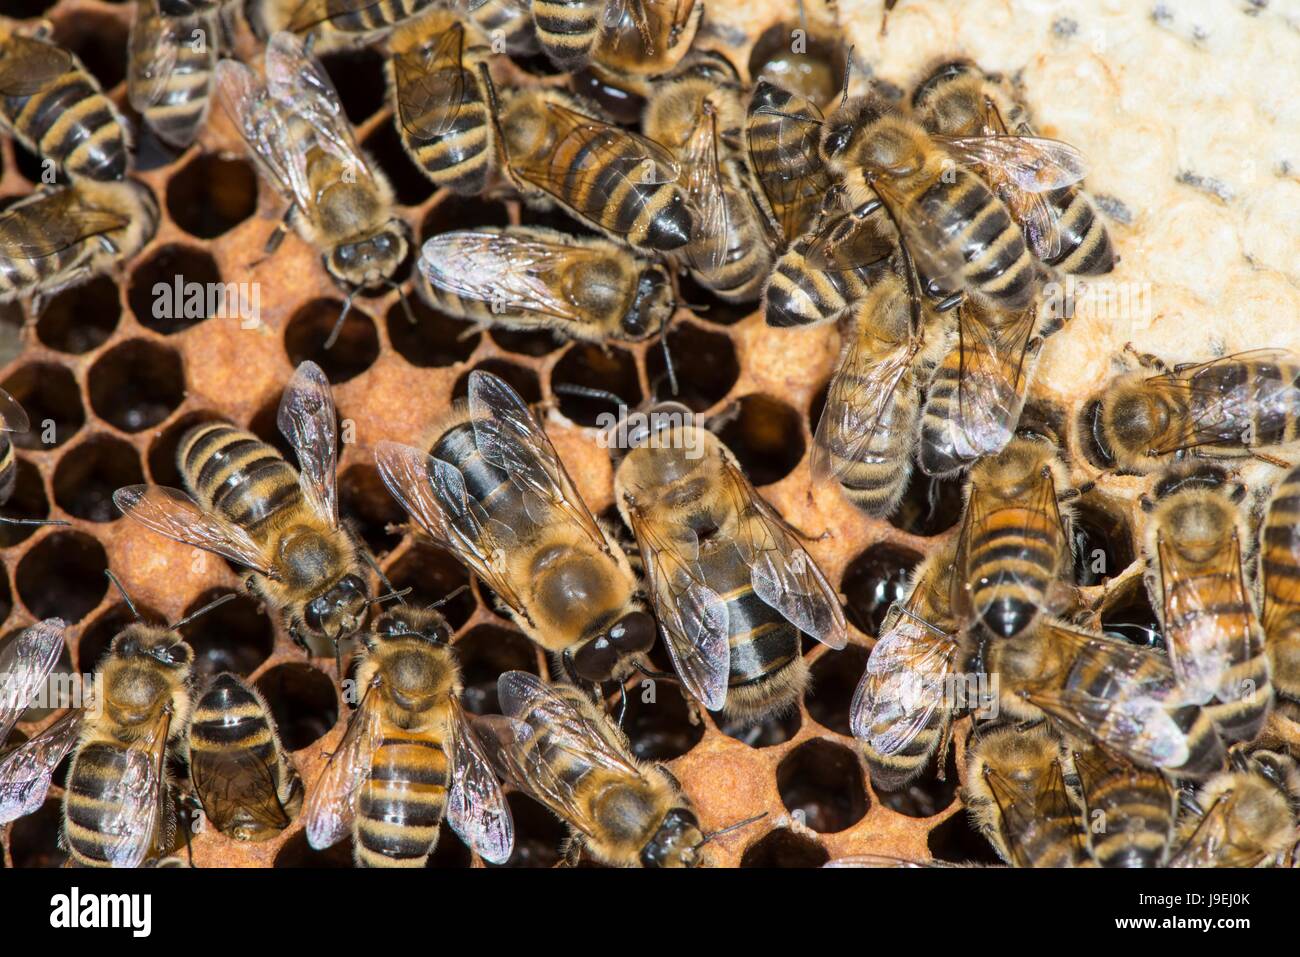 Honey Bee colony showing female worker bees and drones on brood chamber comb. Stock Photo